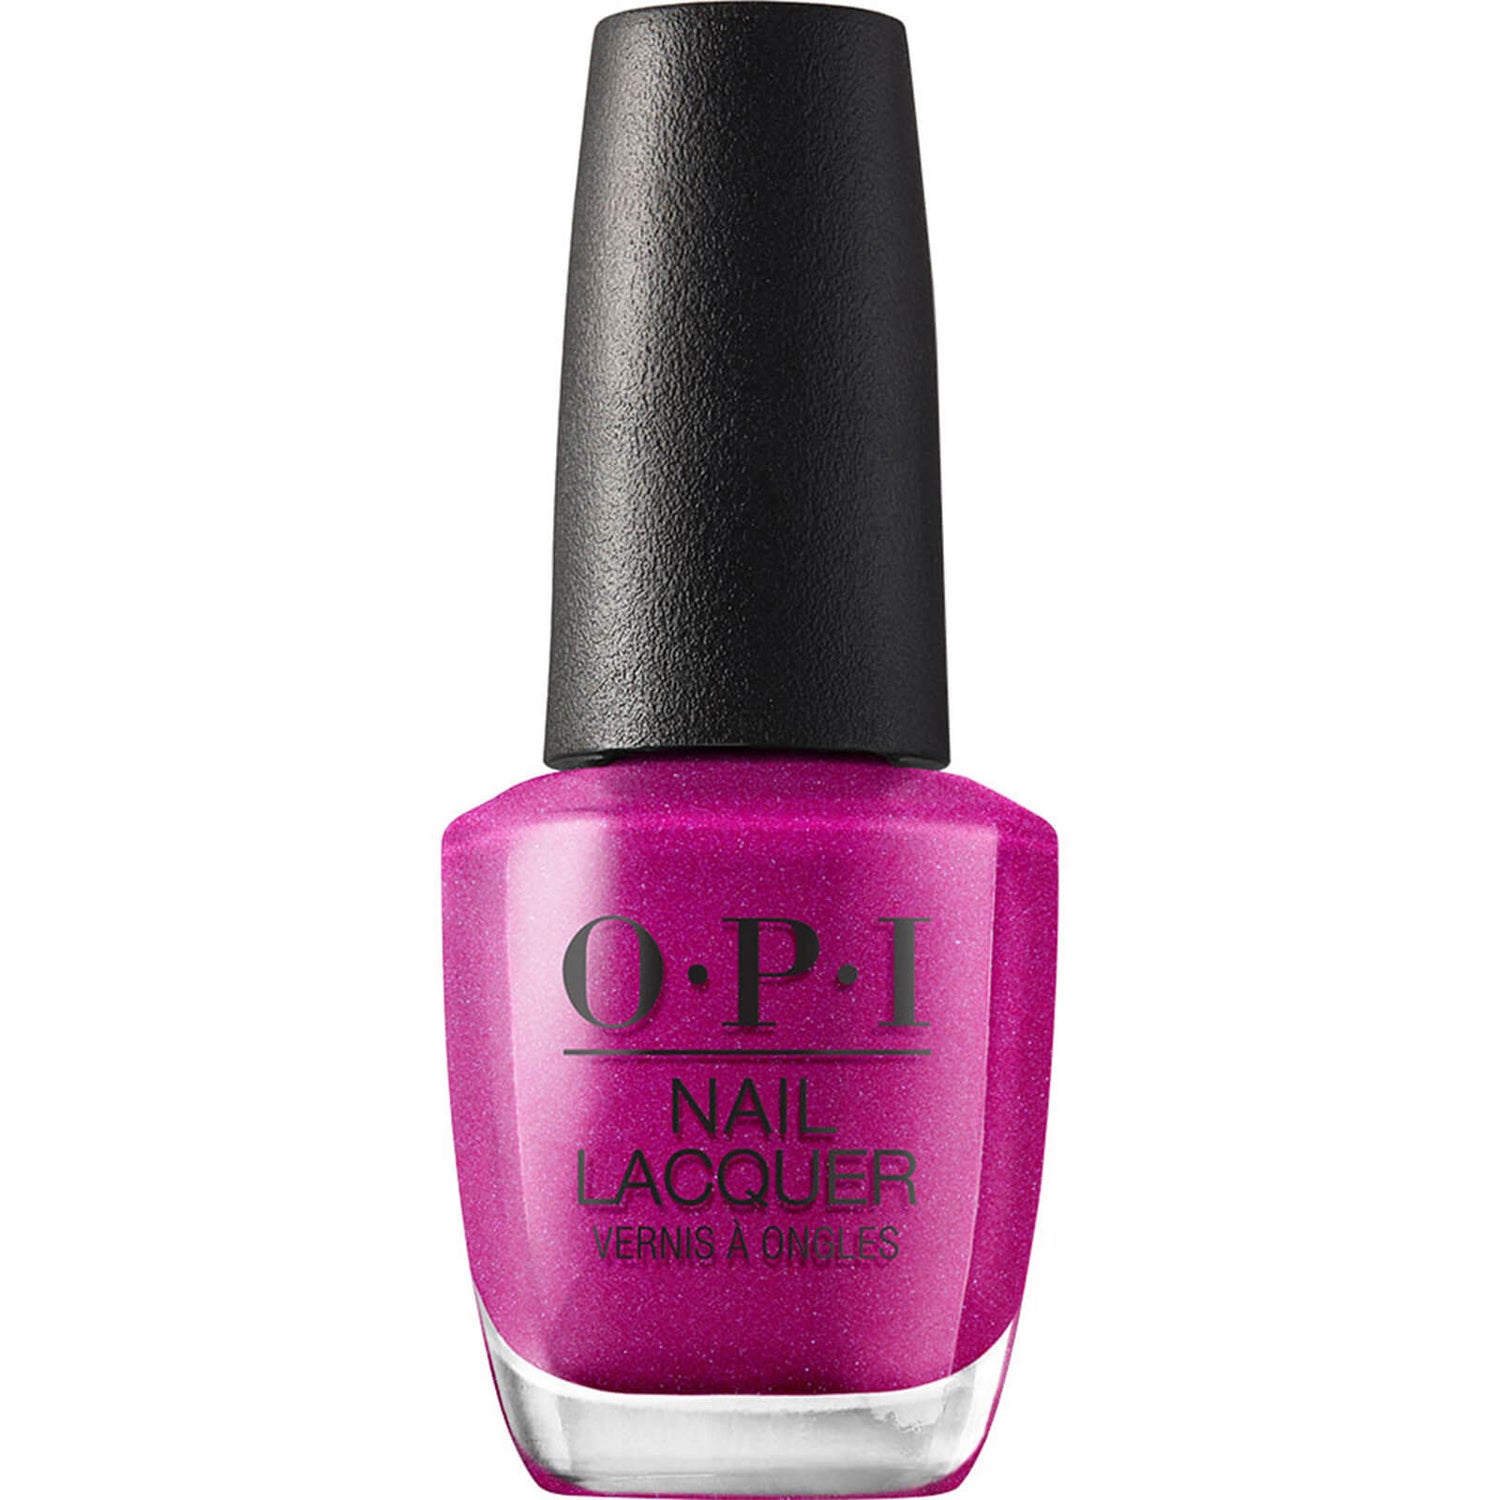 OPI Tokyo Collection All Your Dreams in Vending Machines Nail Lacquer 15ml